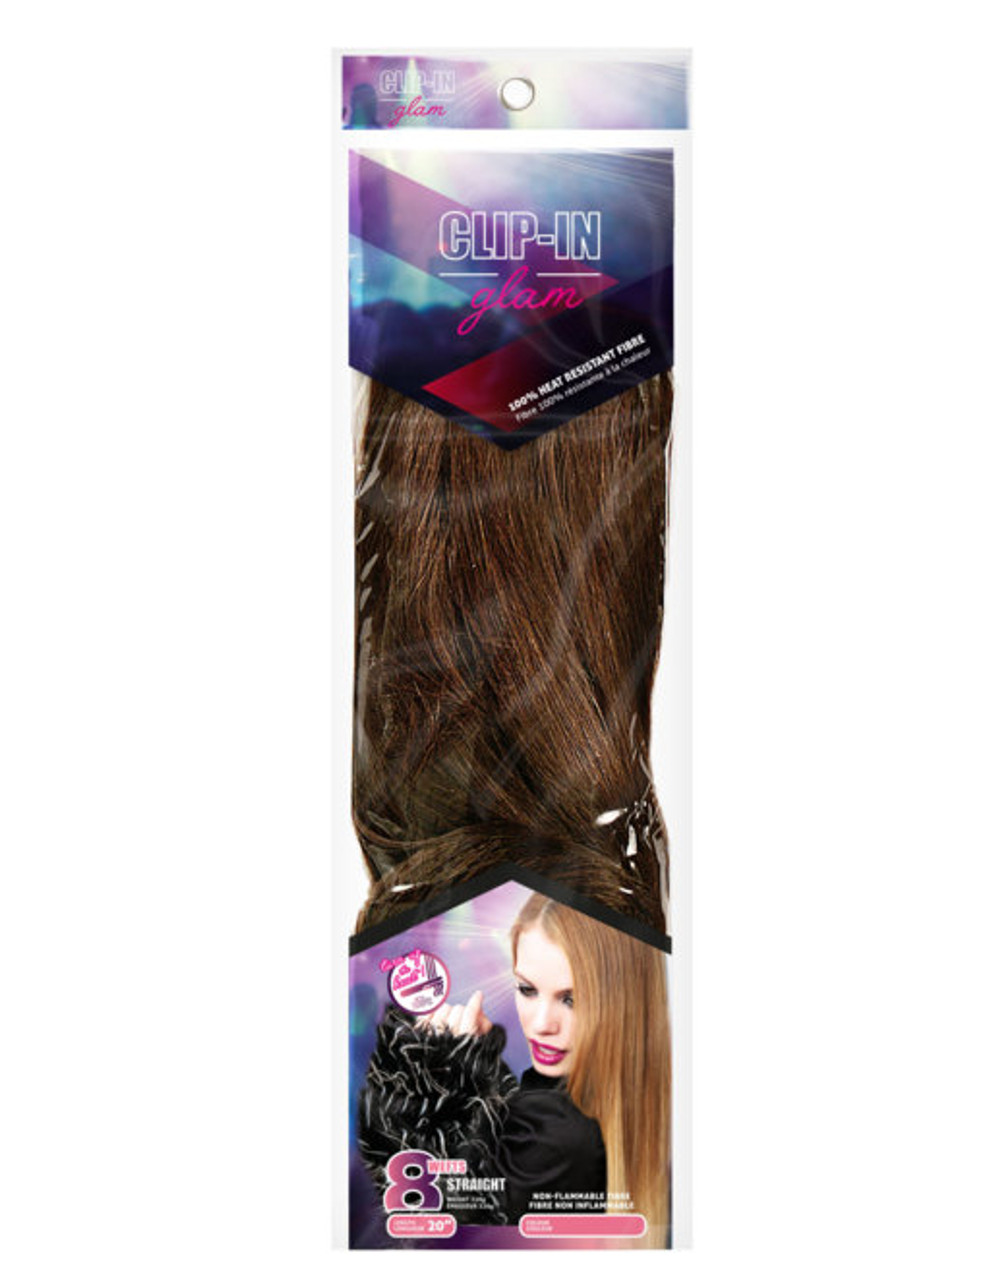 Clip-In Glam Straight 8-Piece Hair Extensions